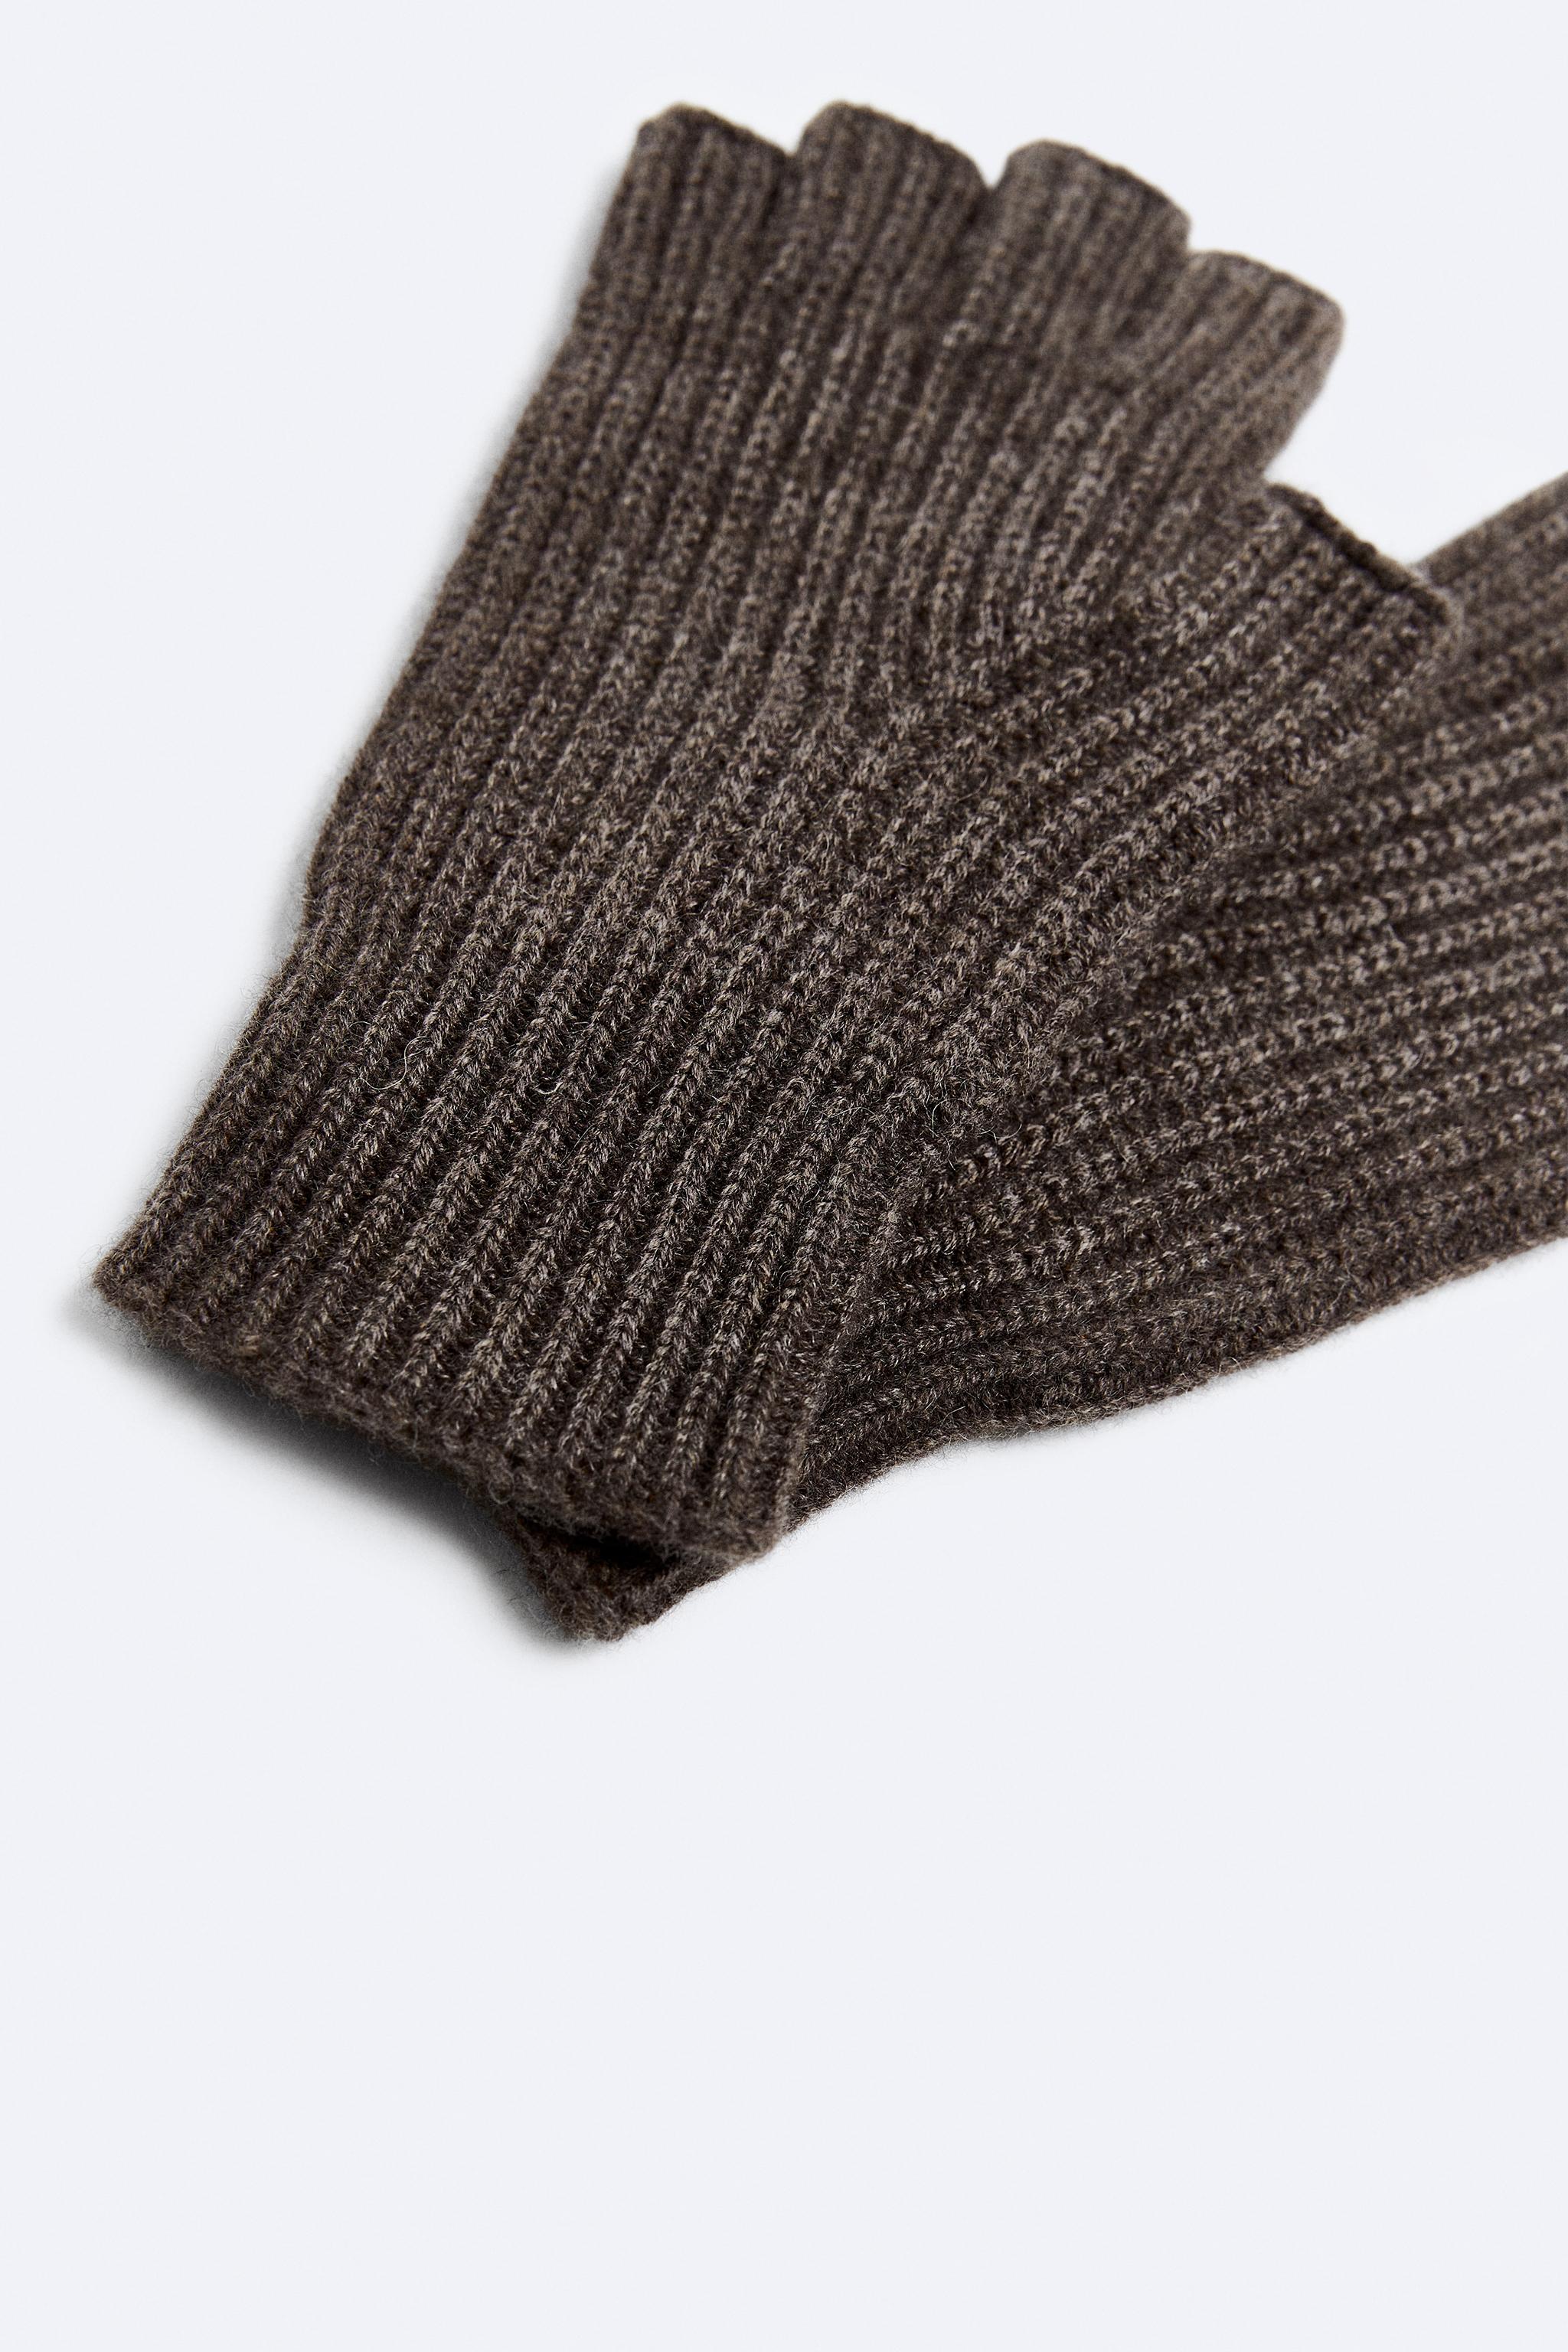 100% CASHMERE FINGERLESS GLOVES - taupe brown